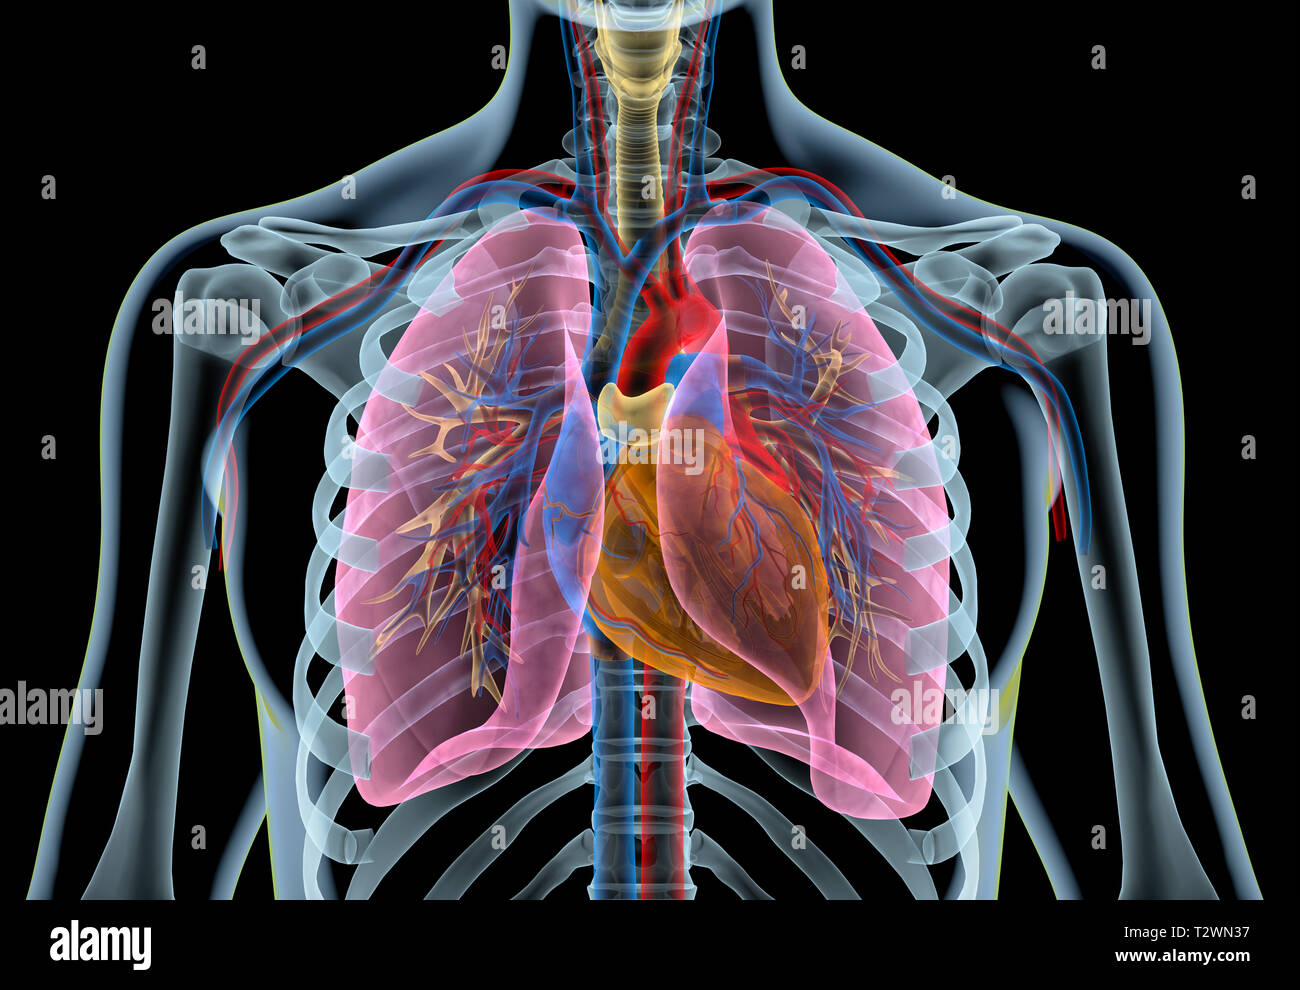 Human Heart With Vessels Lungs Bronchial Tree And Cut Rib Cage X Ray Effect On Black Background Stock Photo Alamy